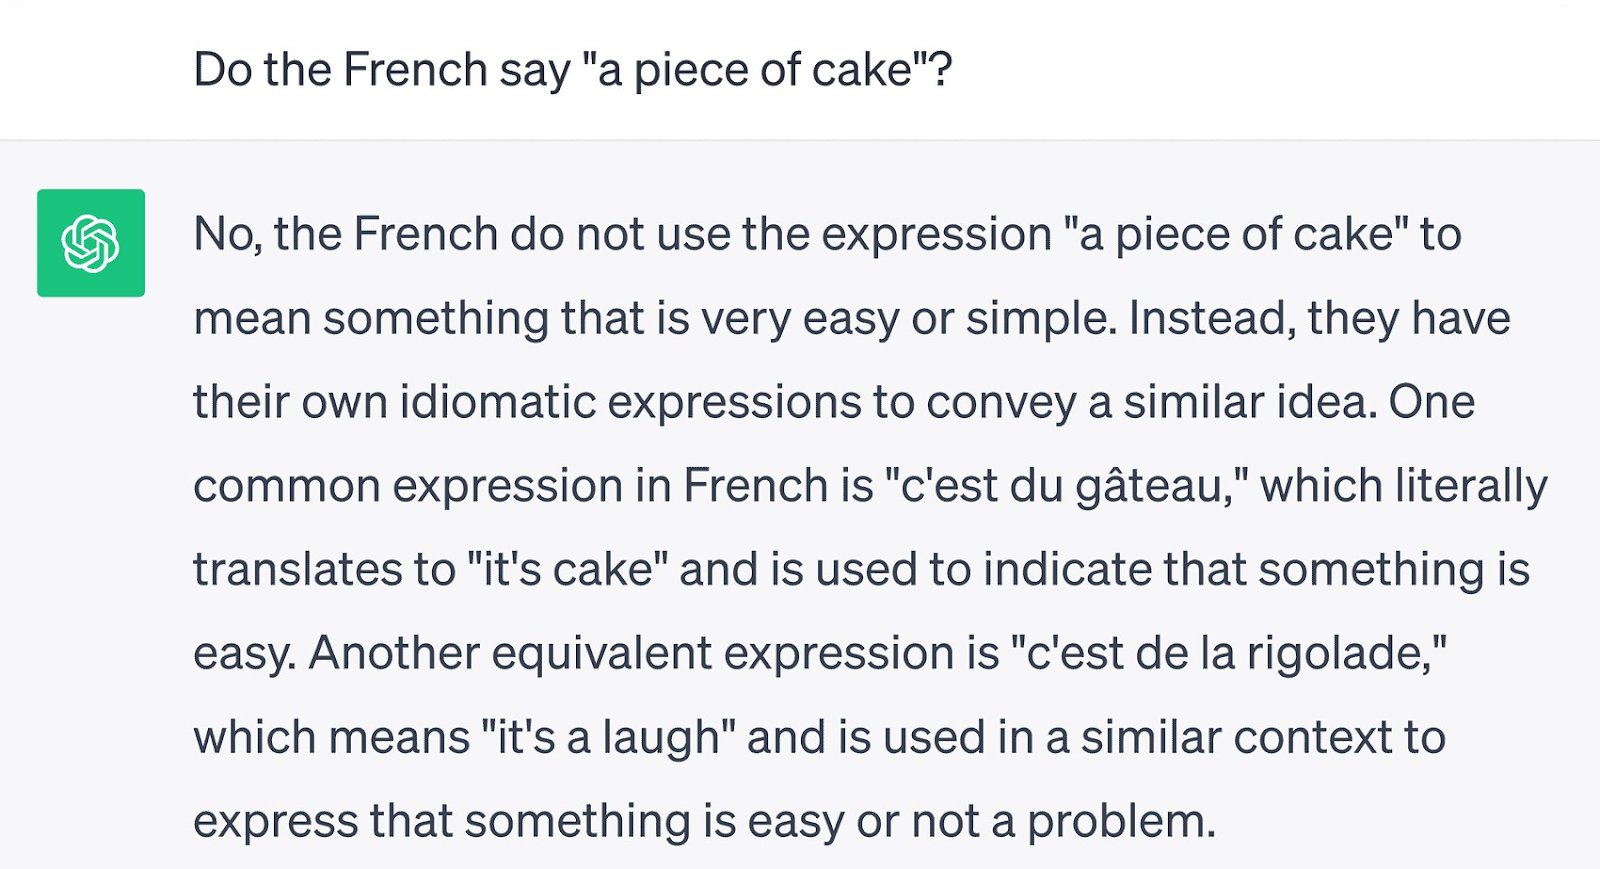 ChatGPT response to "Do the French say “a piece of cake”" prompt